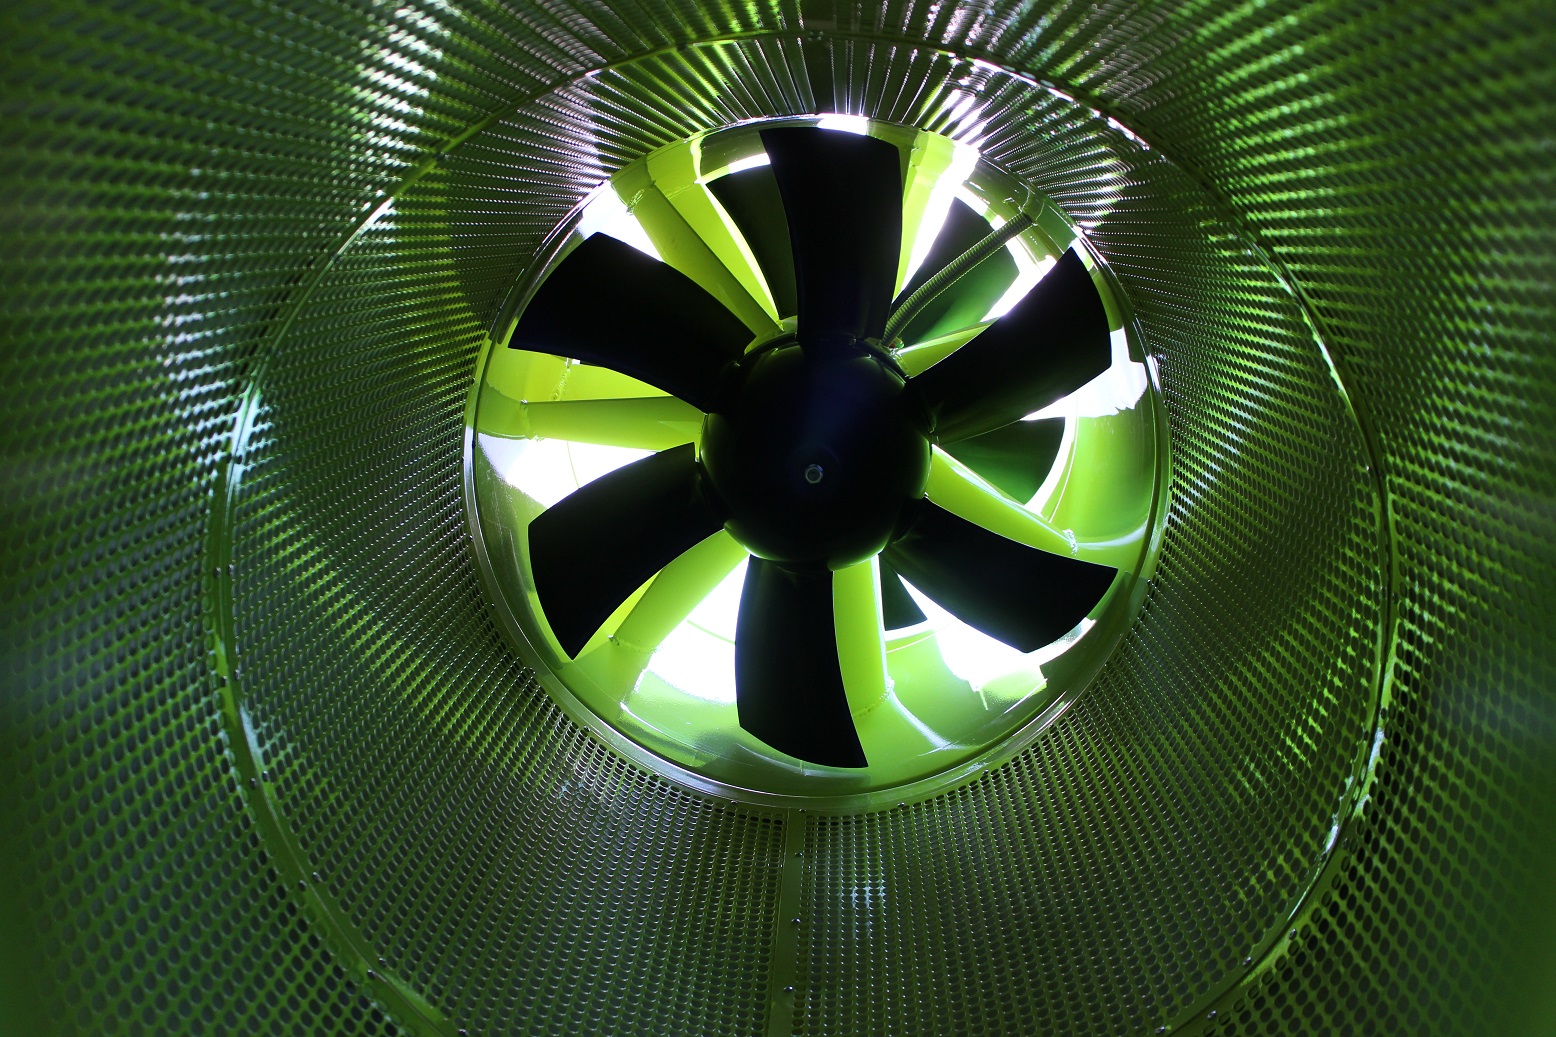 WOLF series fan with acoustic (noise) damper.